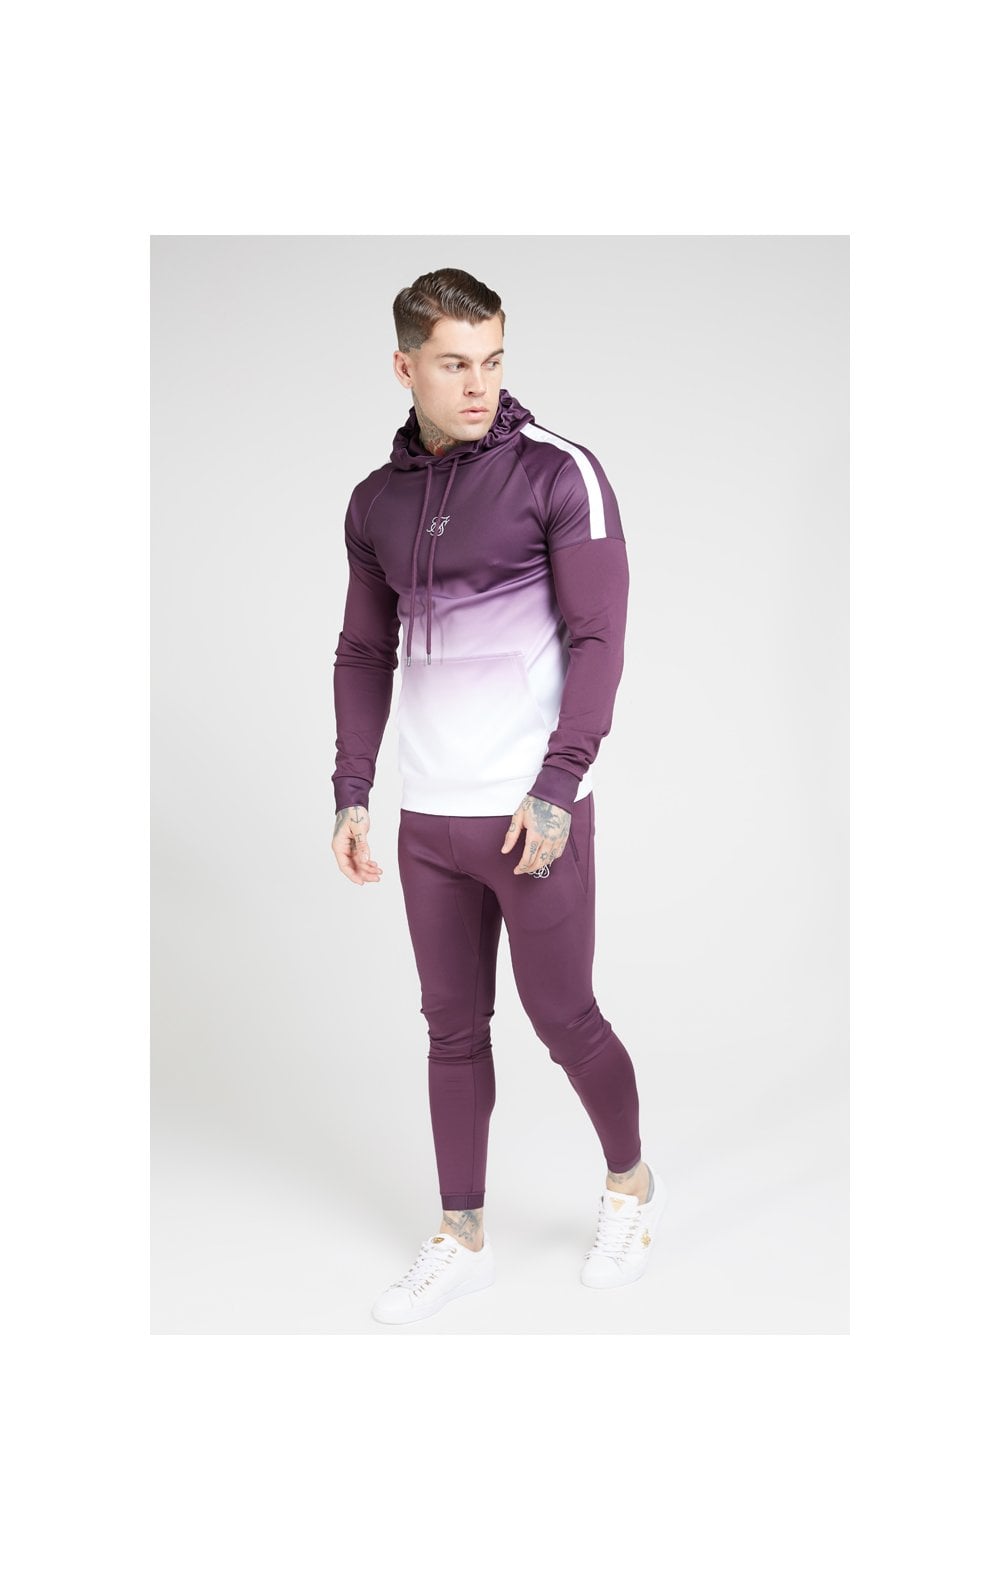 Load image into Gallery viewer, SikSilk Vapour Hybrid Sleeve Tape Hoodie - Rich Burgundy Fade (4)